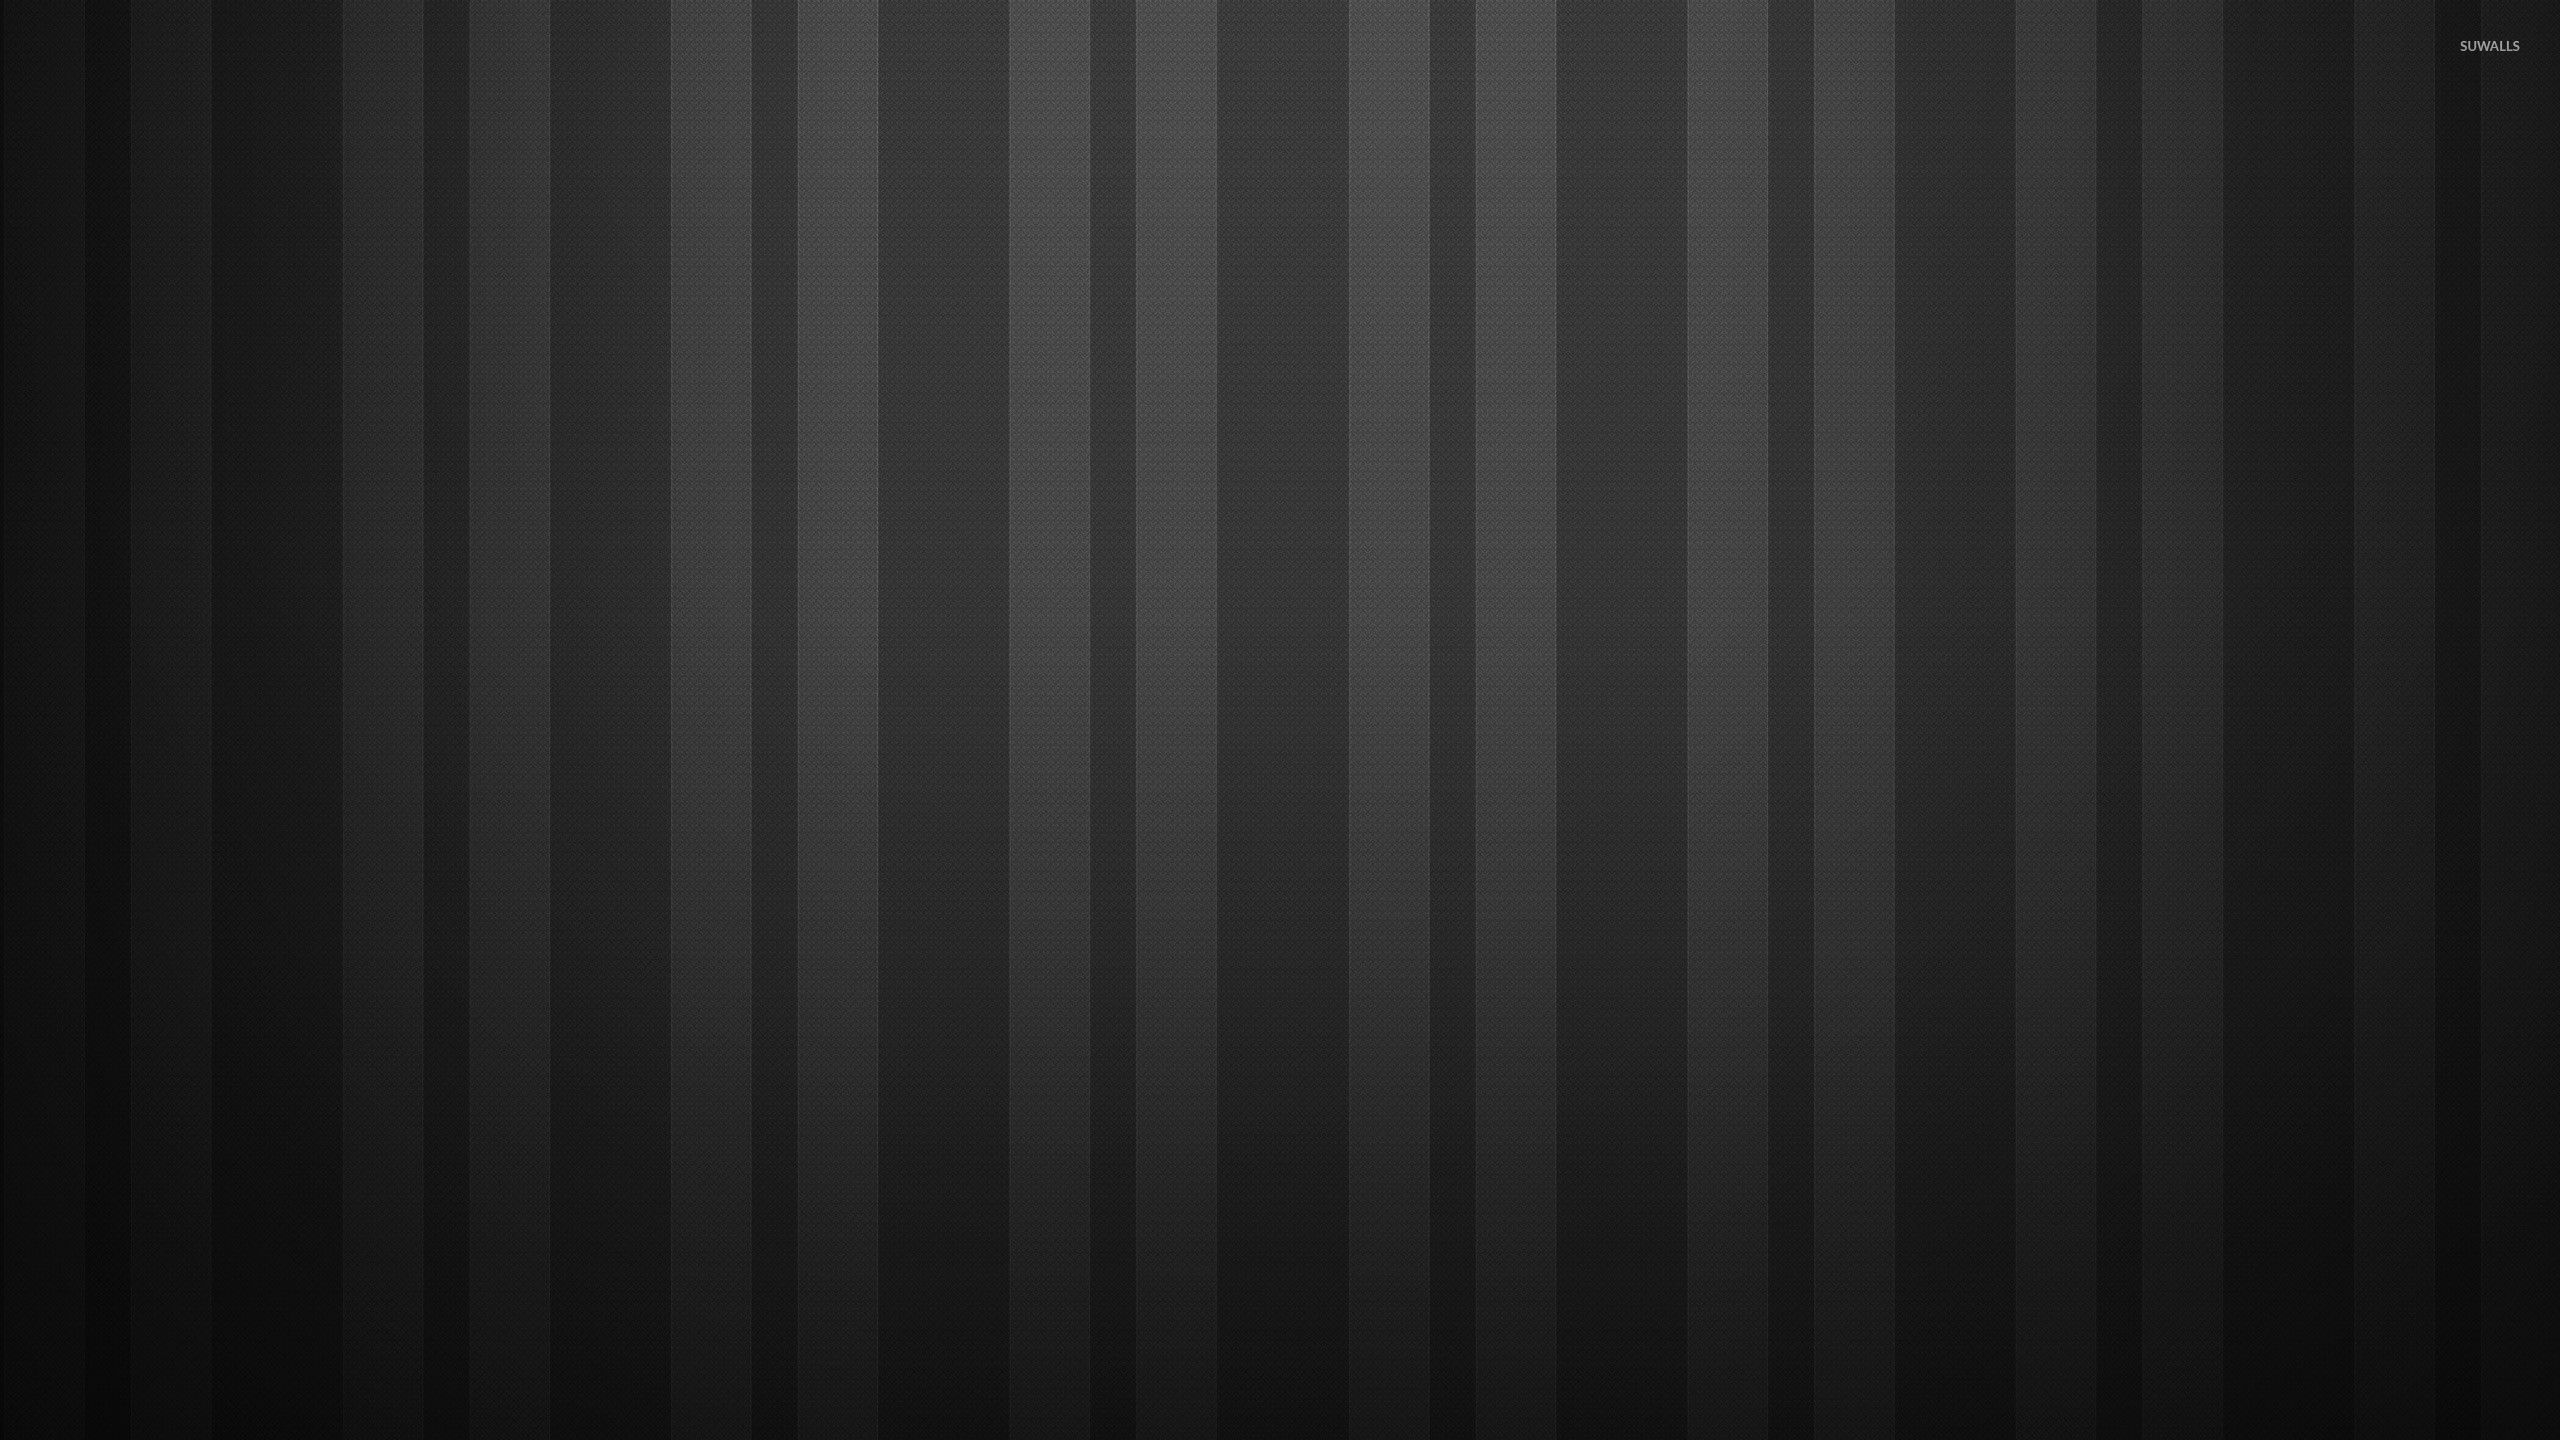 Vertical grey stripes wallpaper - Abstract wallpapers - #26866